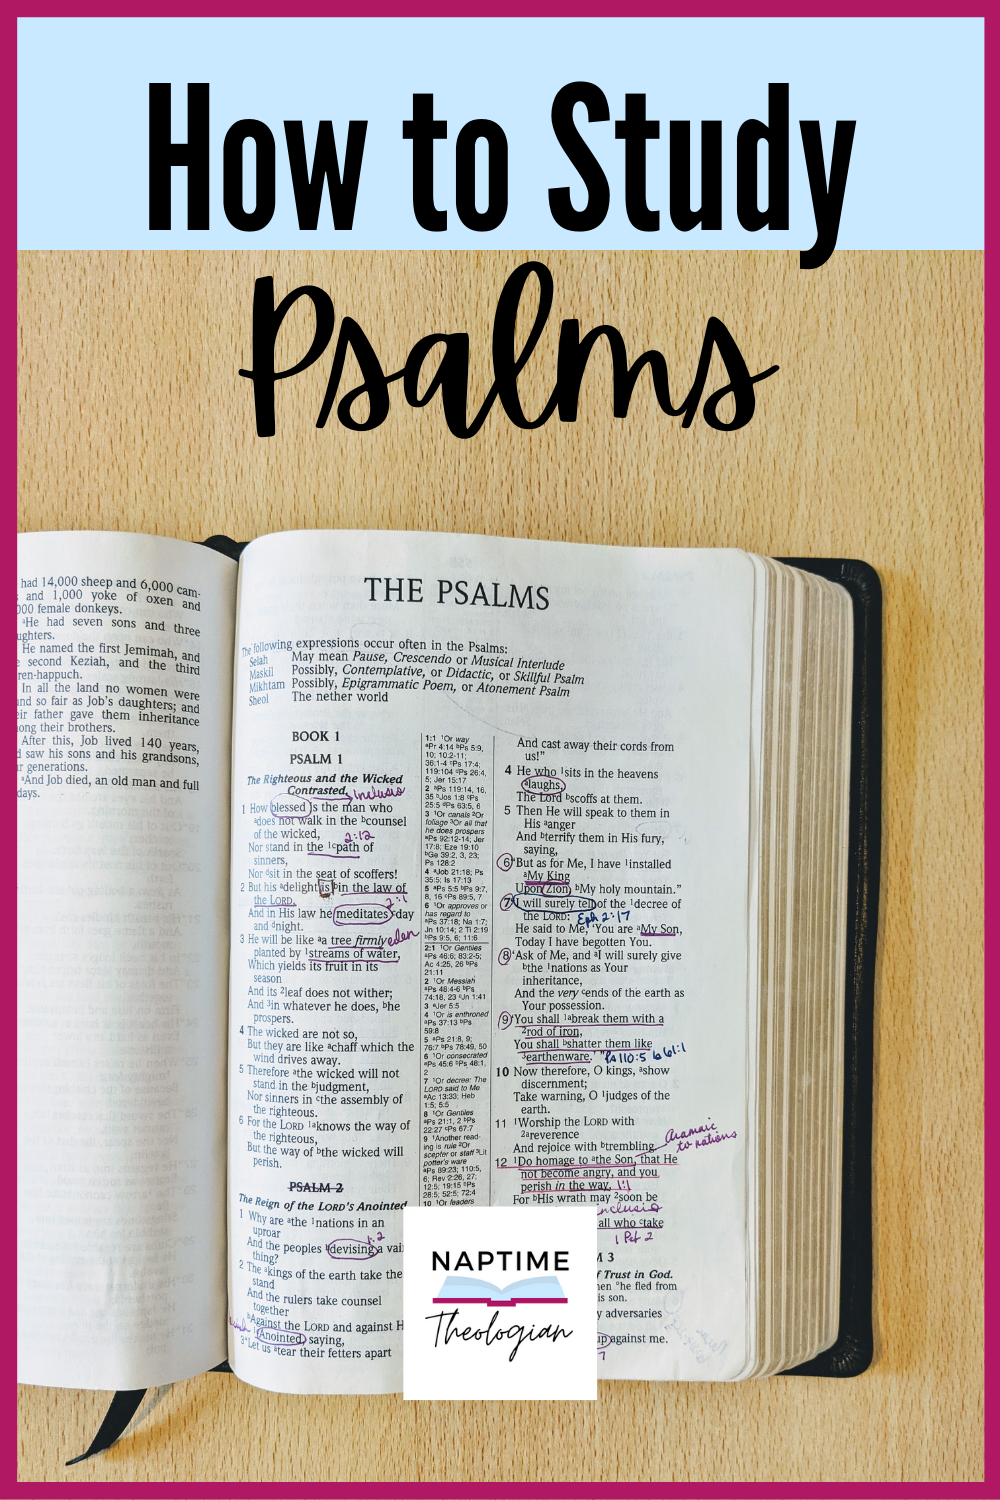 How to Study the Psalms | 5 Methods and Resources